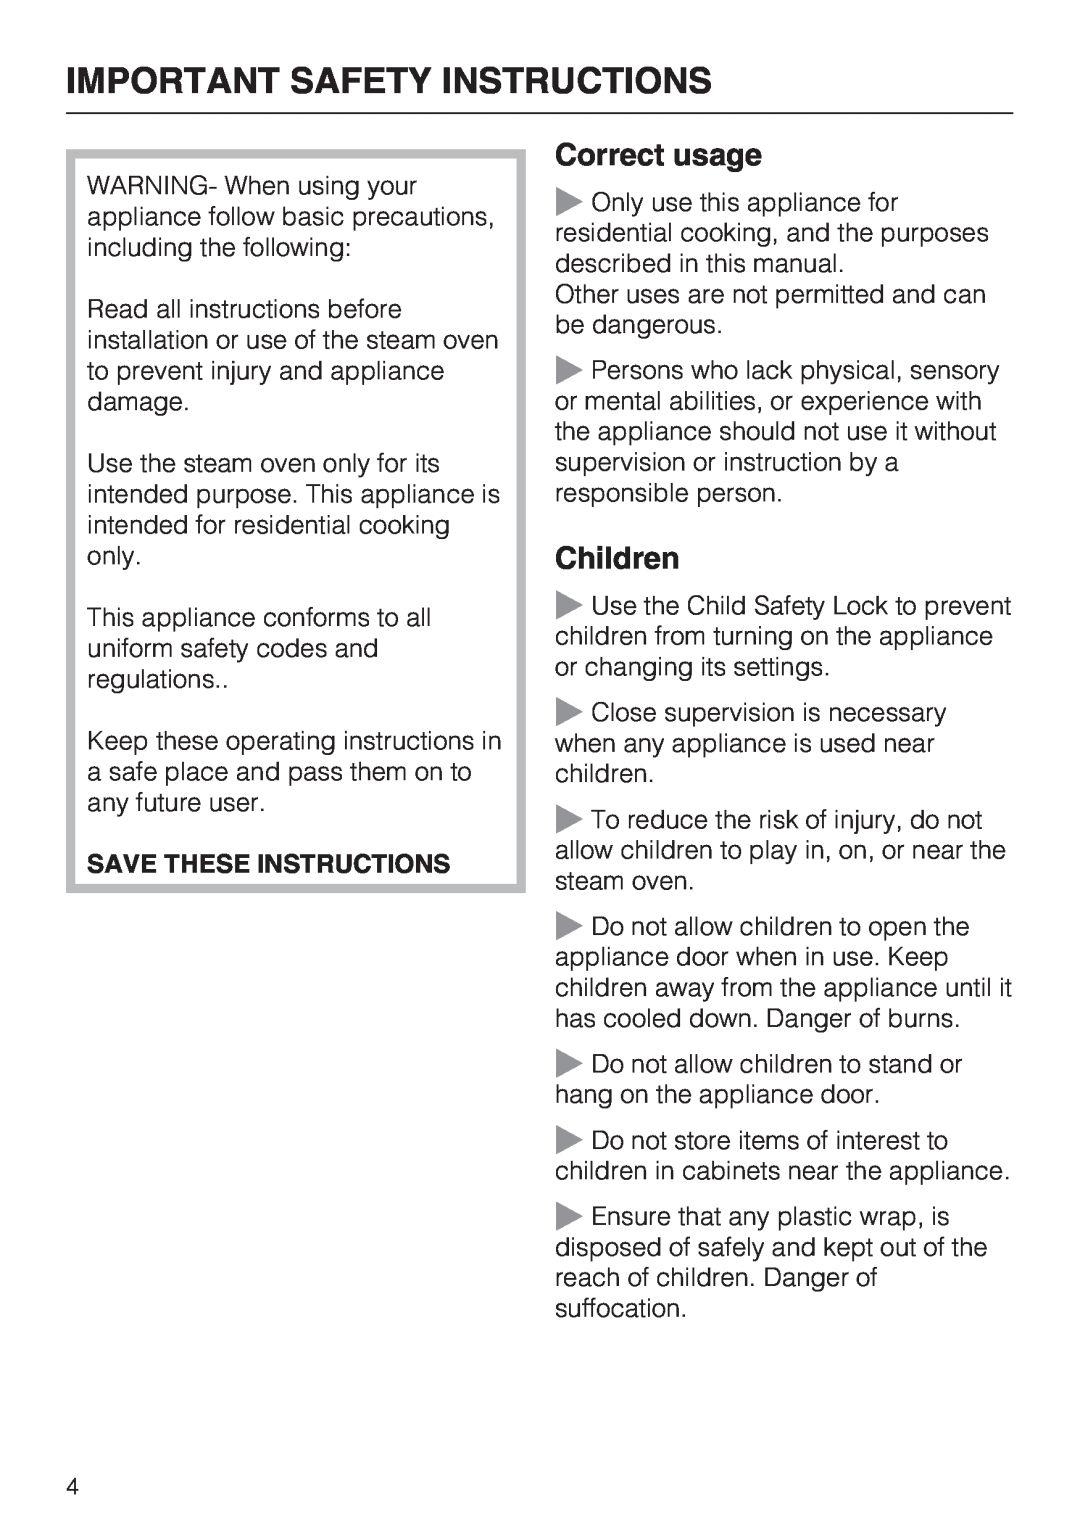 Miele DG4082, DG 4088 installation instructions Important Safety Instructions, Correct usage, Children 